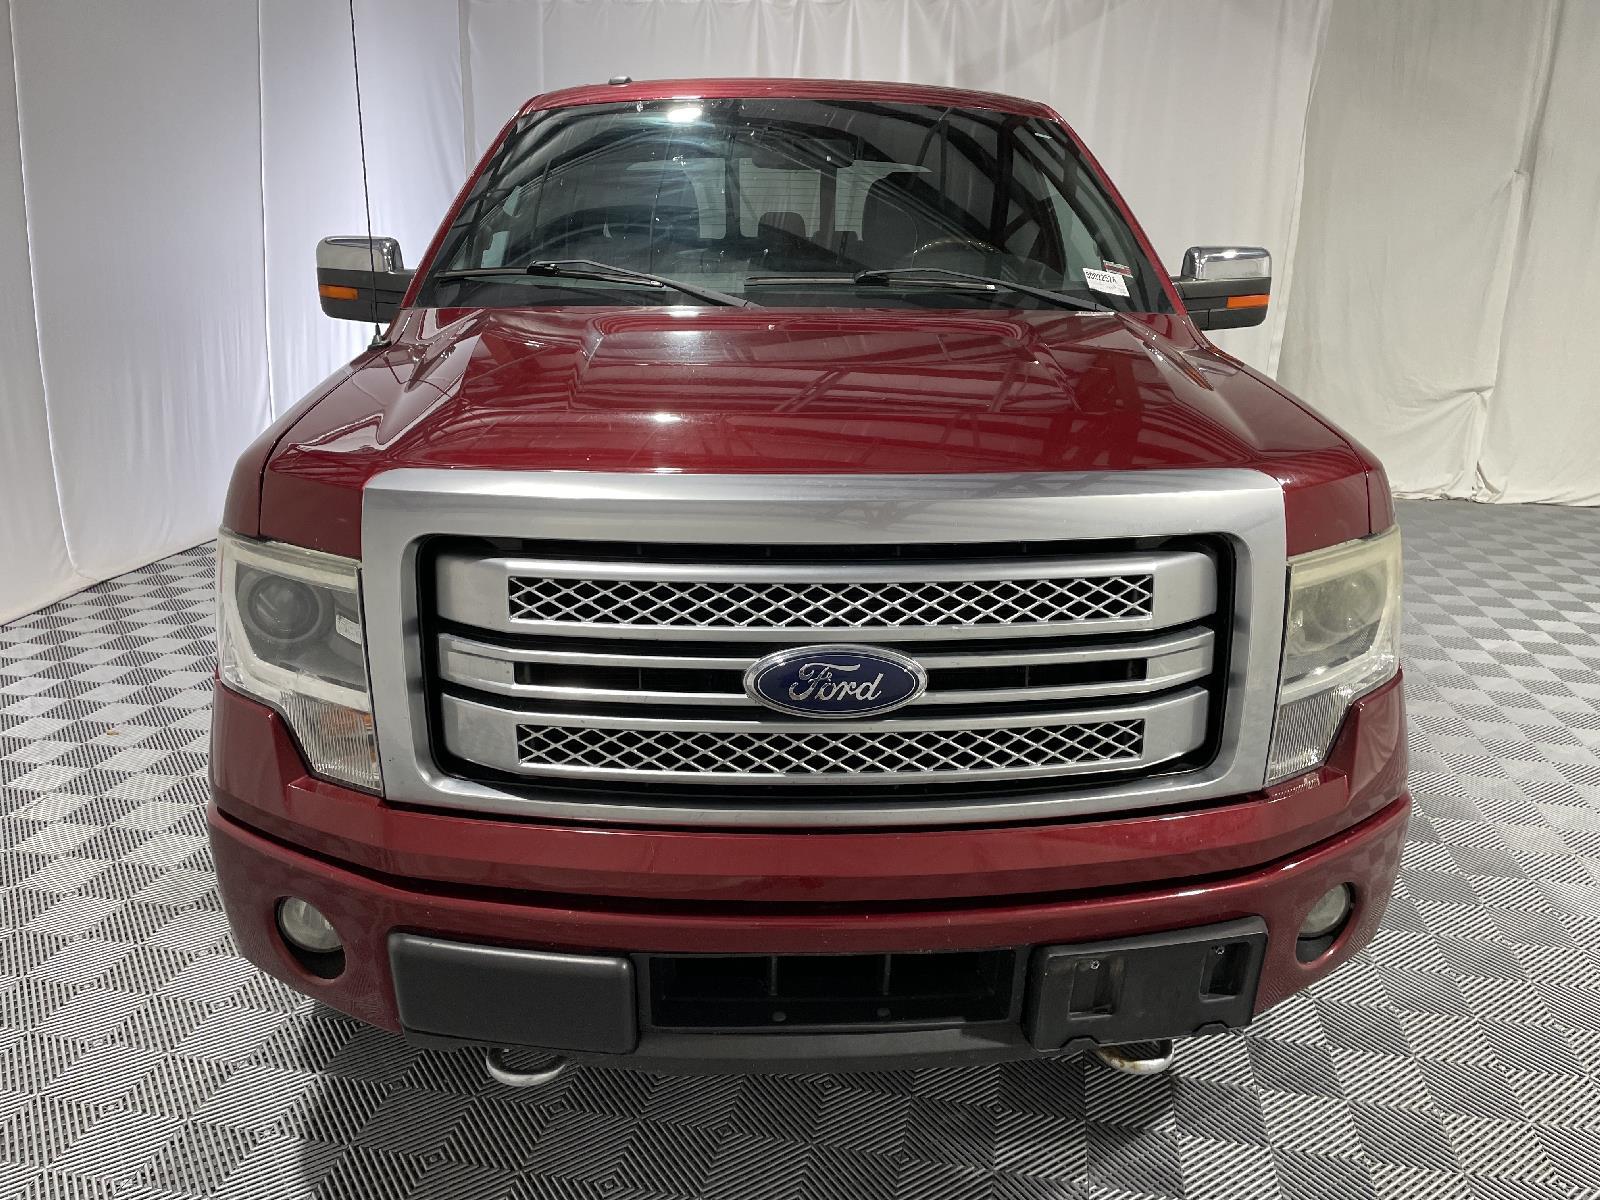 Used 2014 Ford F-150 Platinum Crew Cab Truck for sale in St Joseph MO